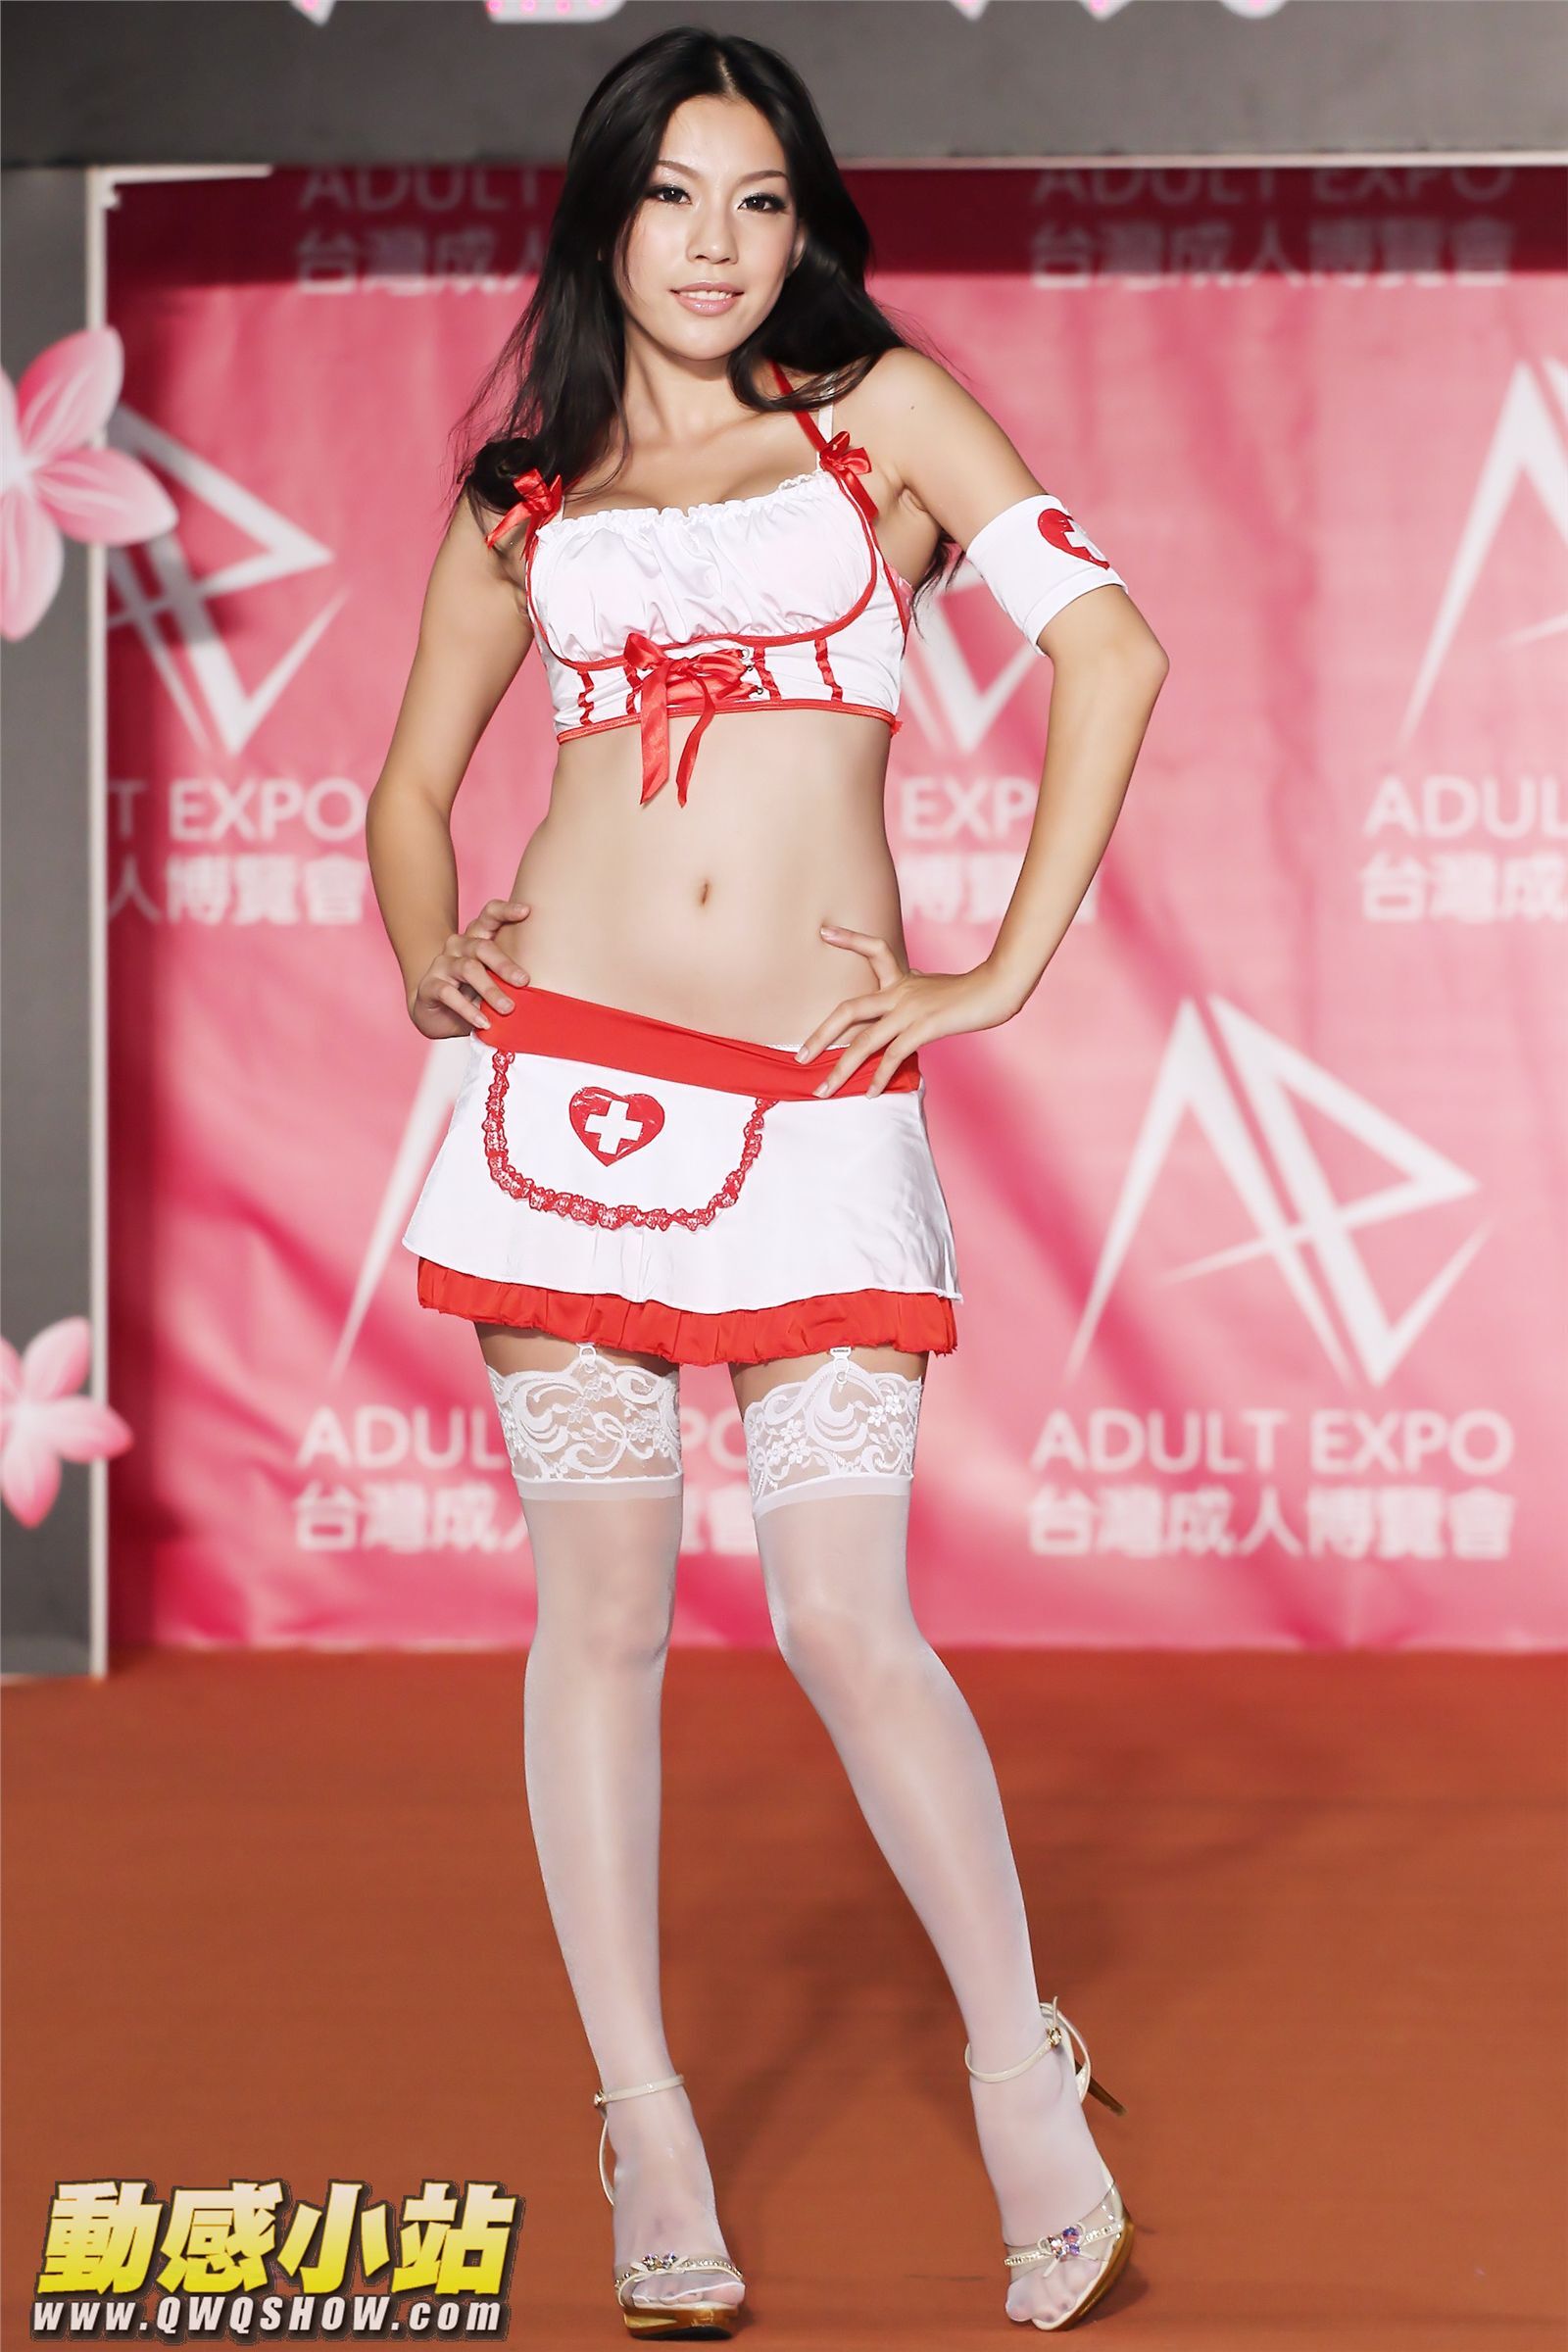 The first Taiwan Adult show